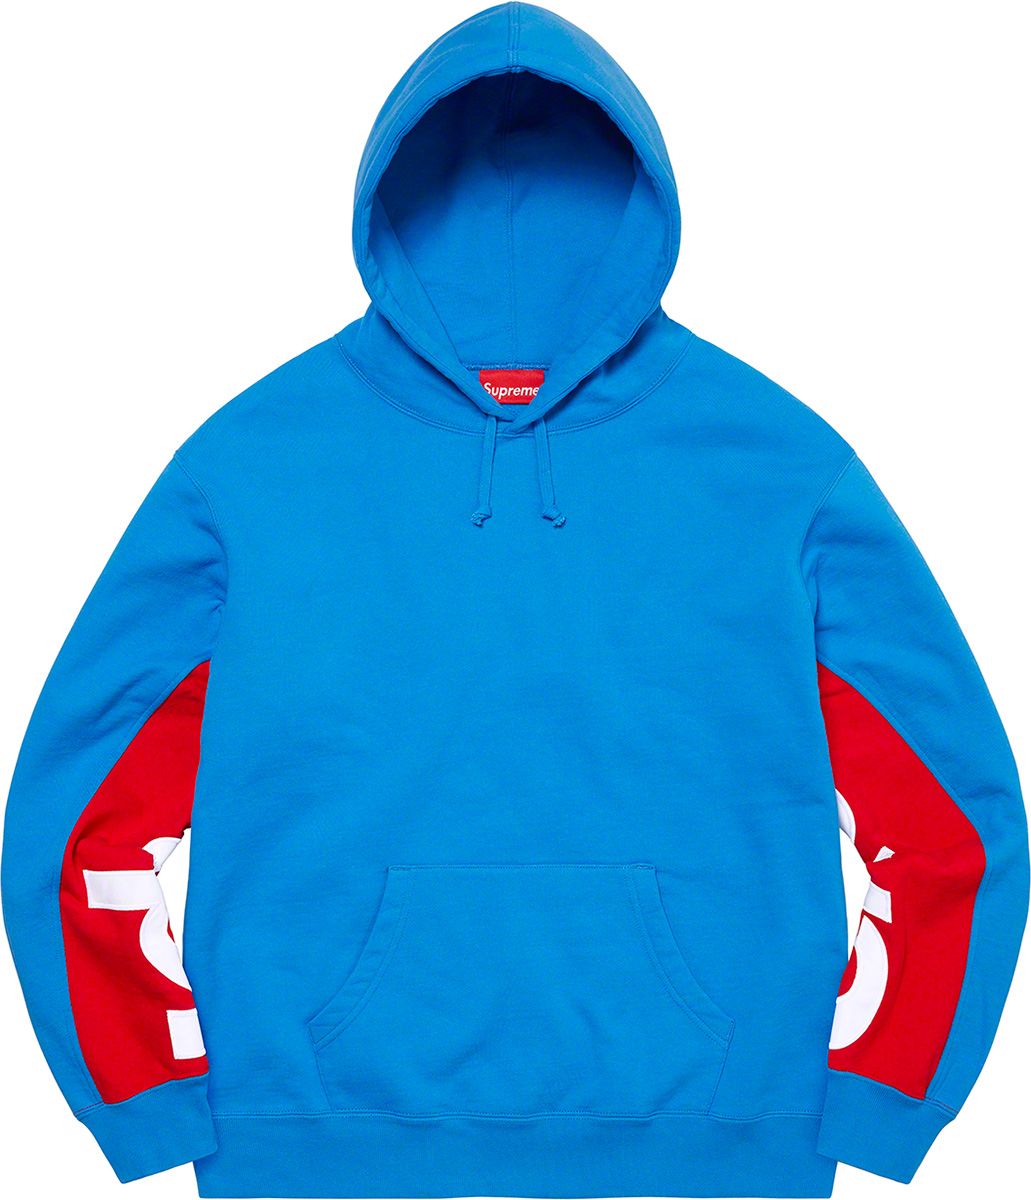 Instant High Patches Hooded Sweatshirt - Spring/Summer 2022